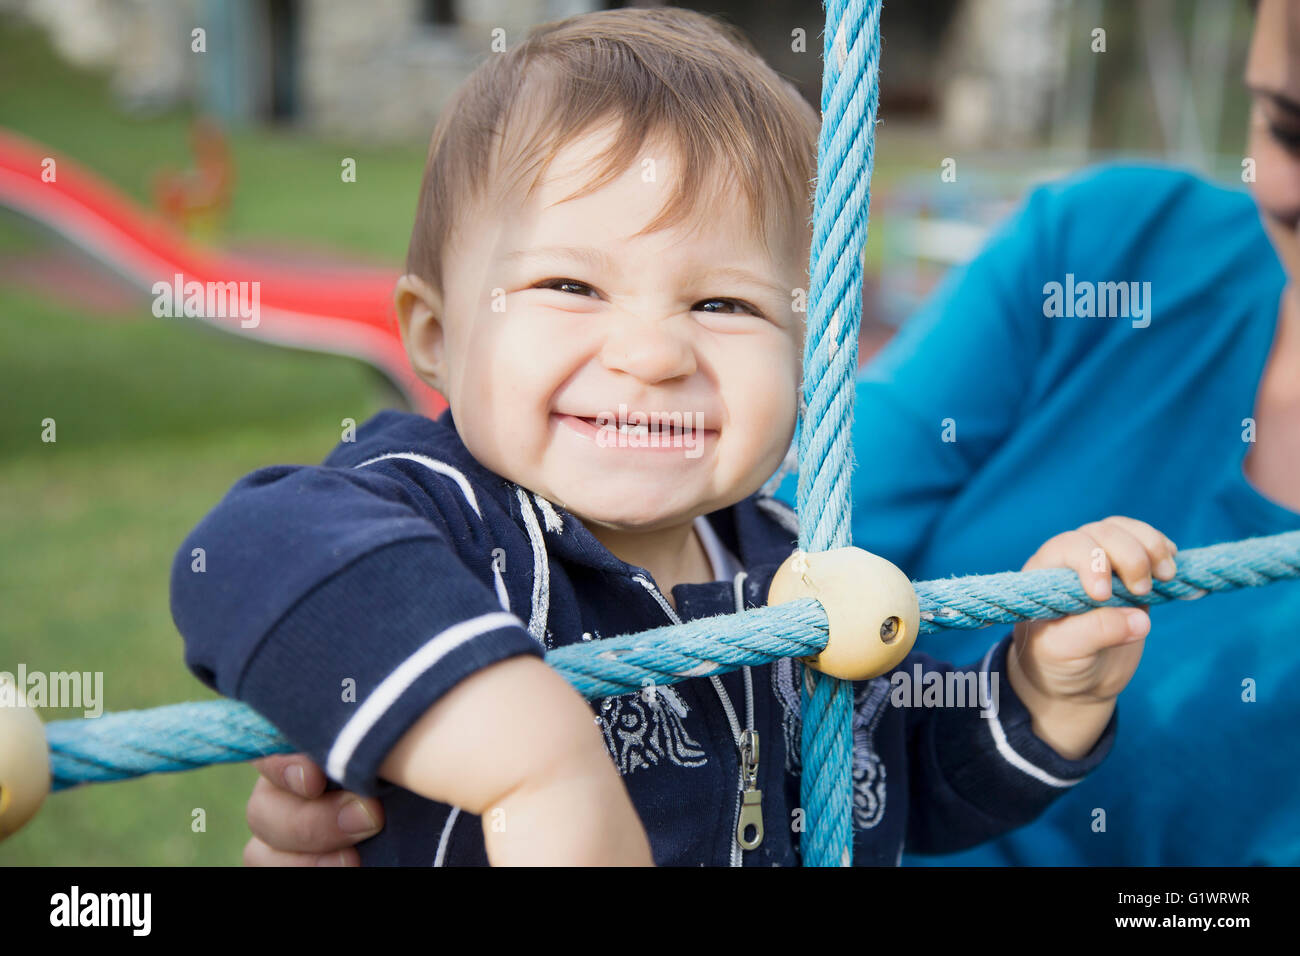 One year old baby girl smiling and looking at camera Stock Photo